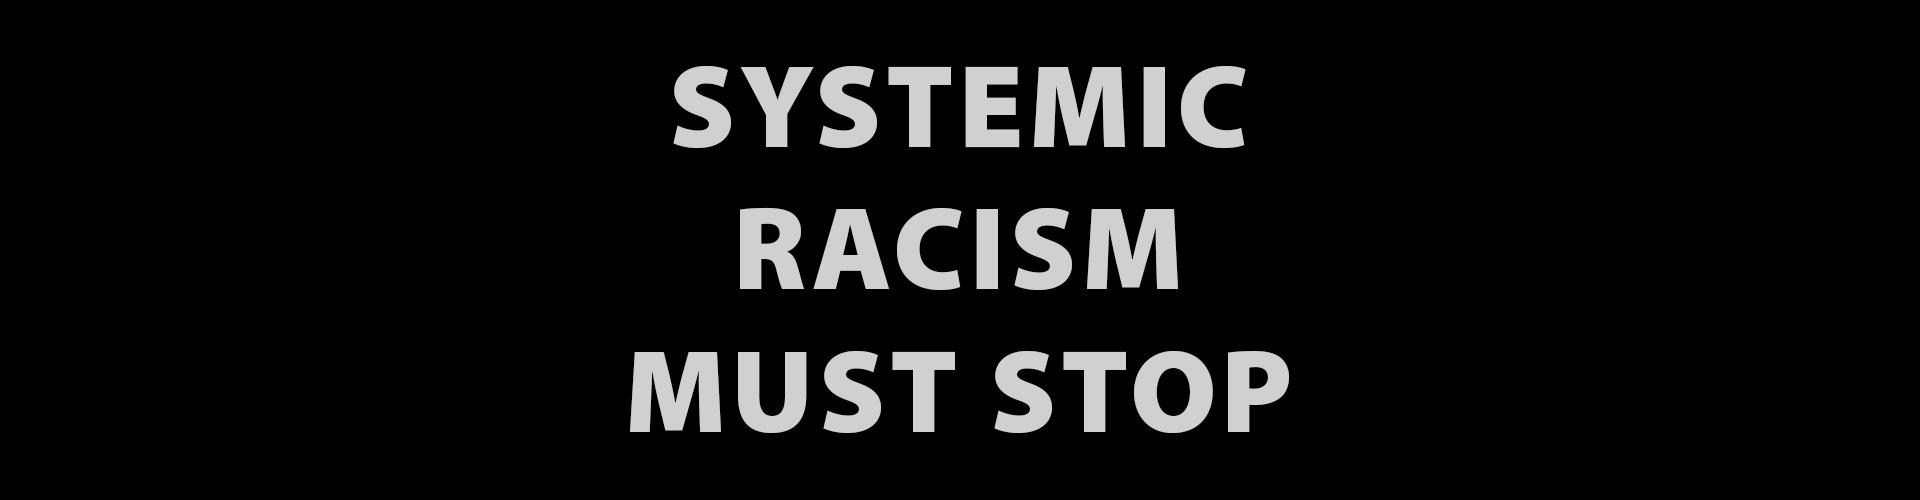 Systemic Racism Must Stop